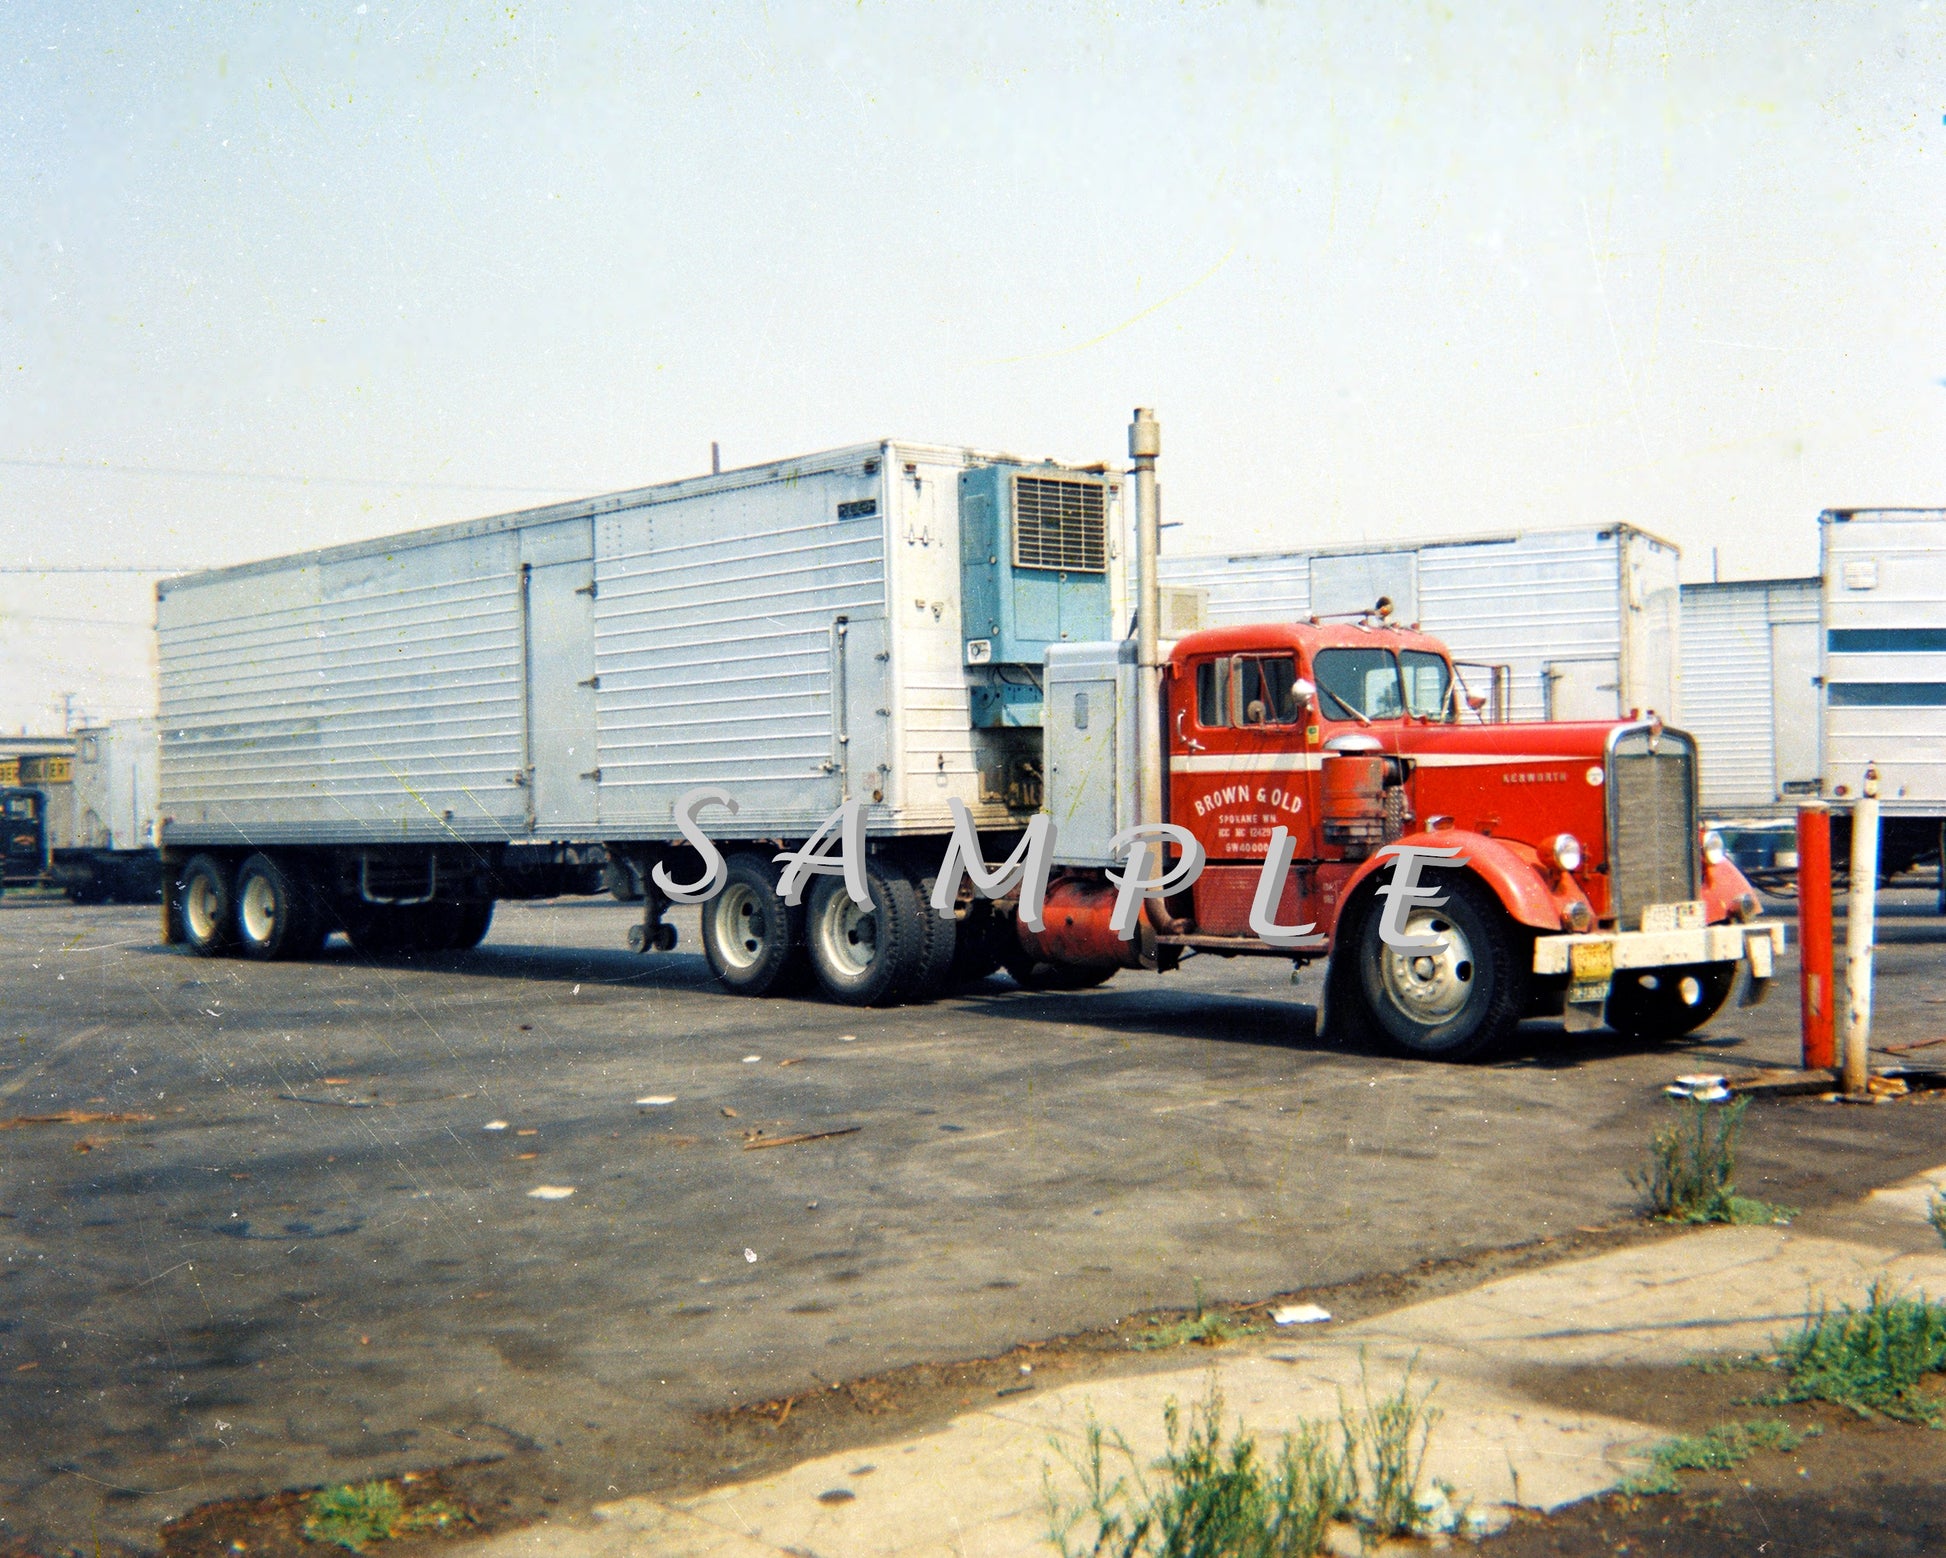 8X10 color semi-truck photo 1950's KW BROWN & OLD TRUCK LINES - Transportation Treasure